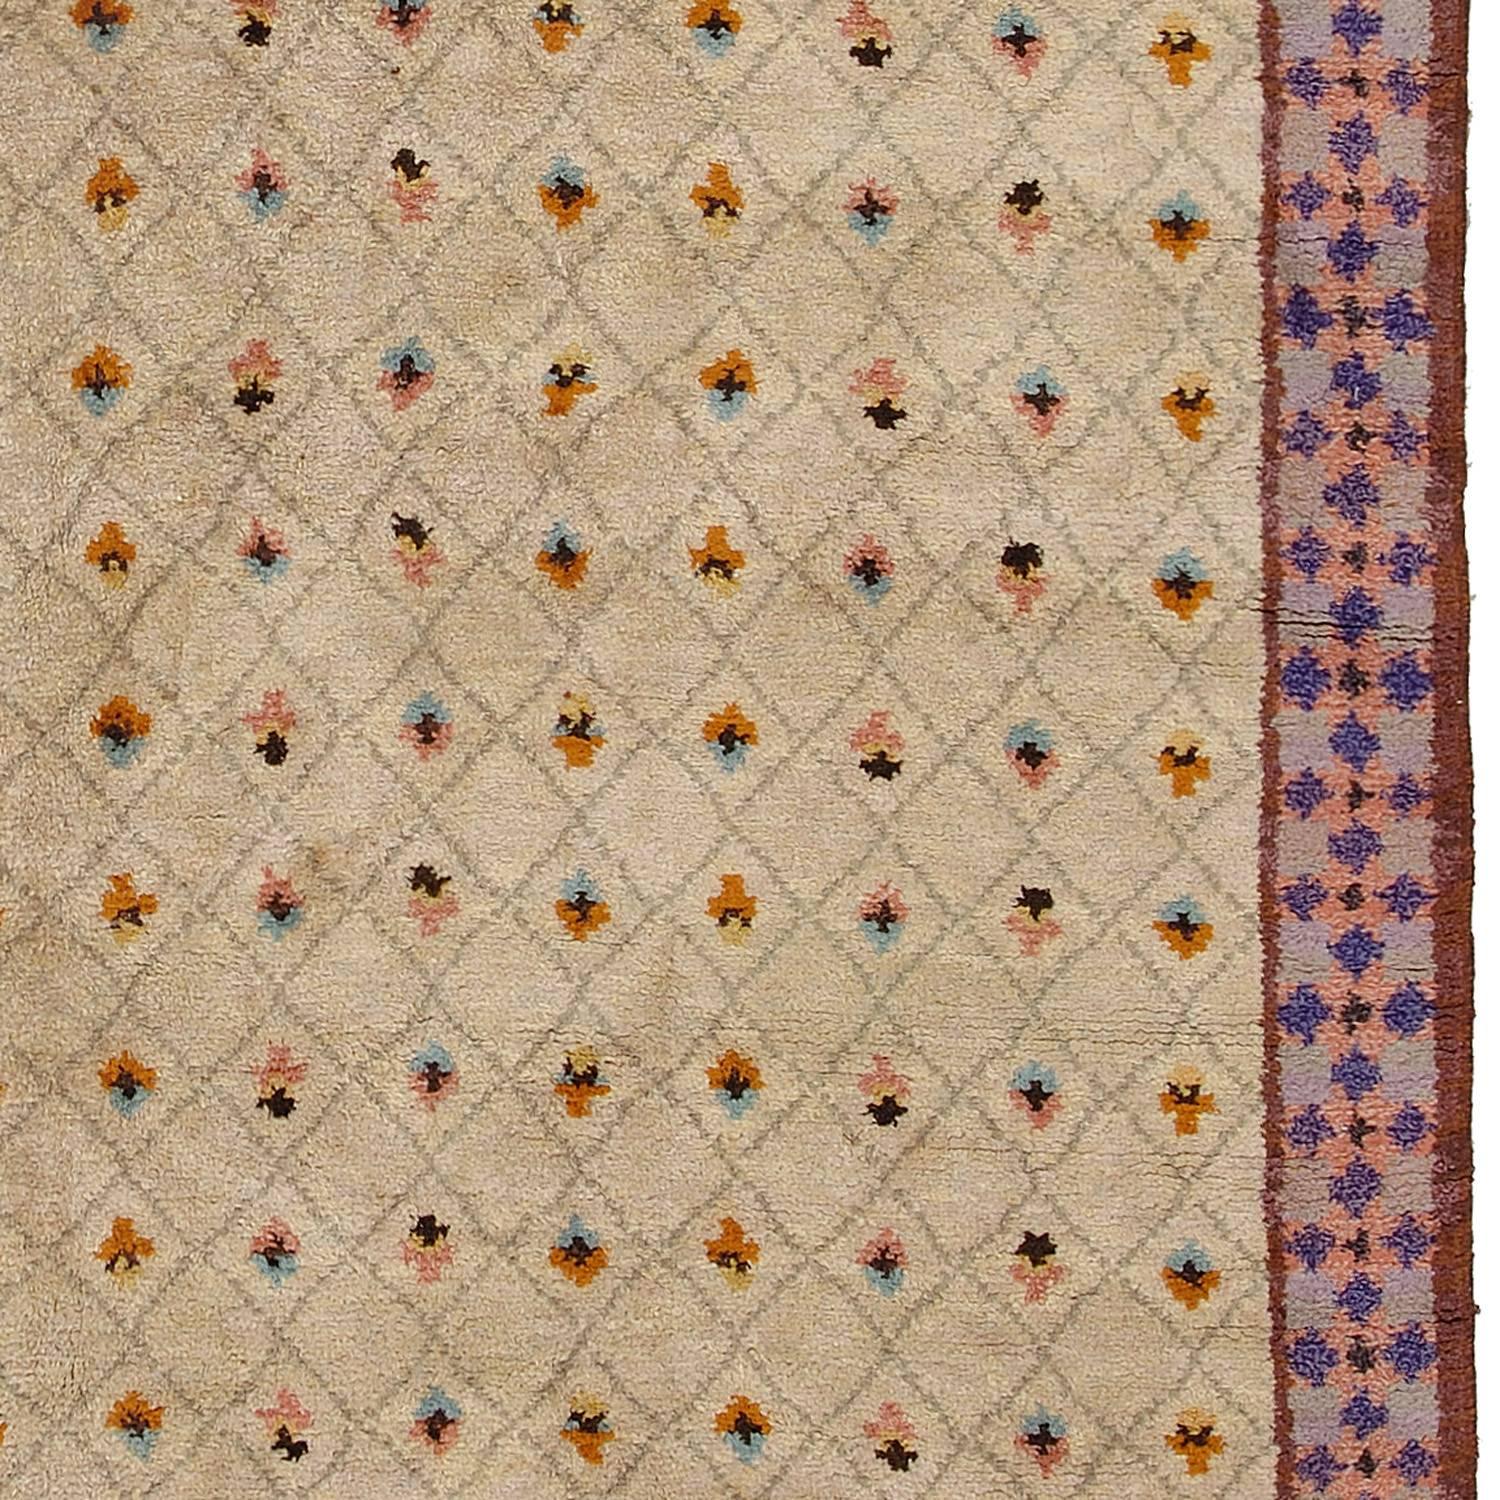 Mid 20th Century Swedish Pile-Weave Carpet by Konst Fluten In Excellent Condition For Sale In New York, NY